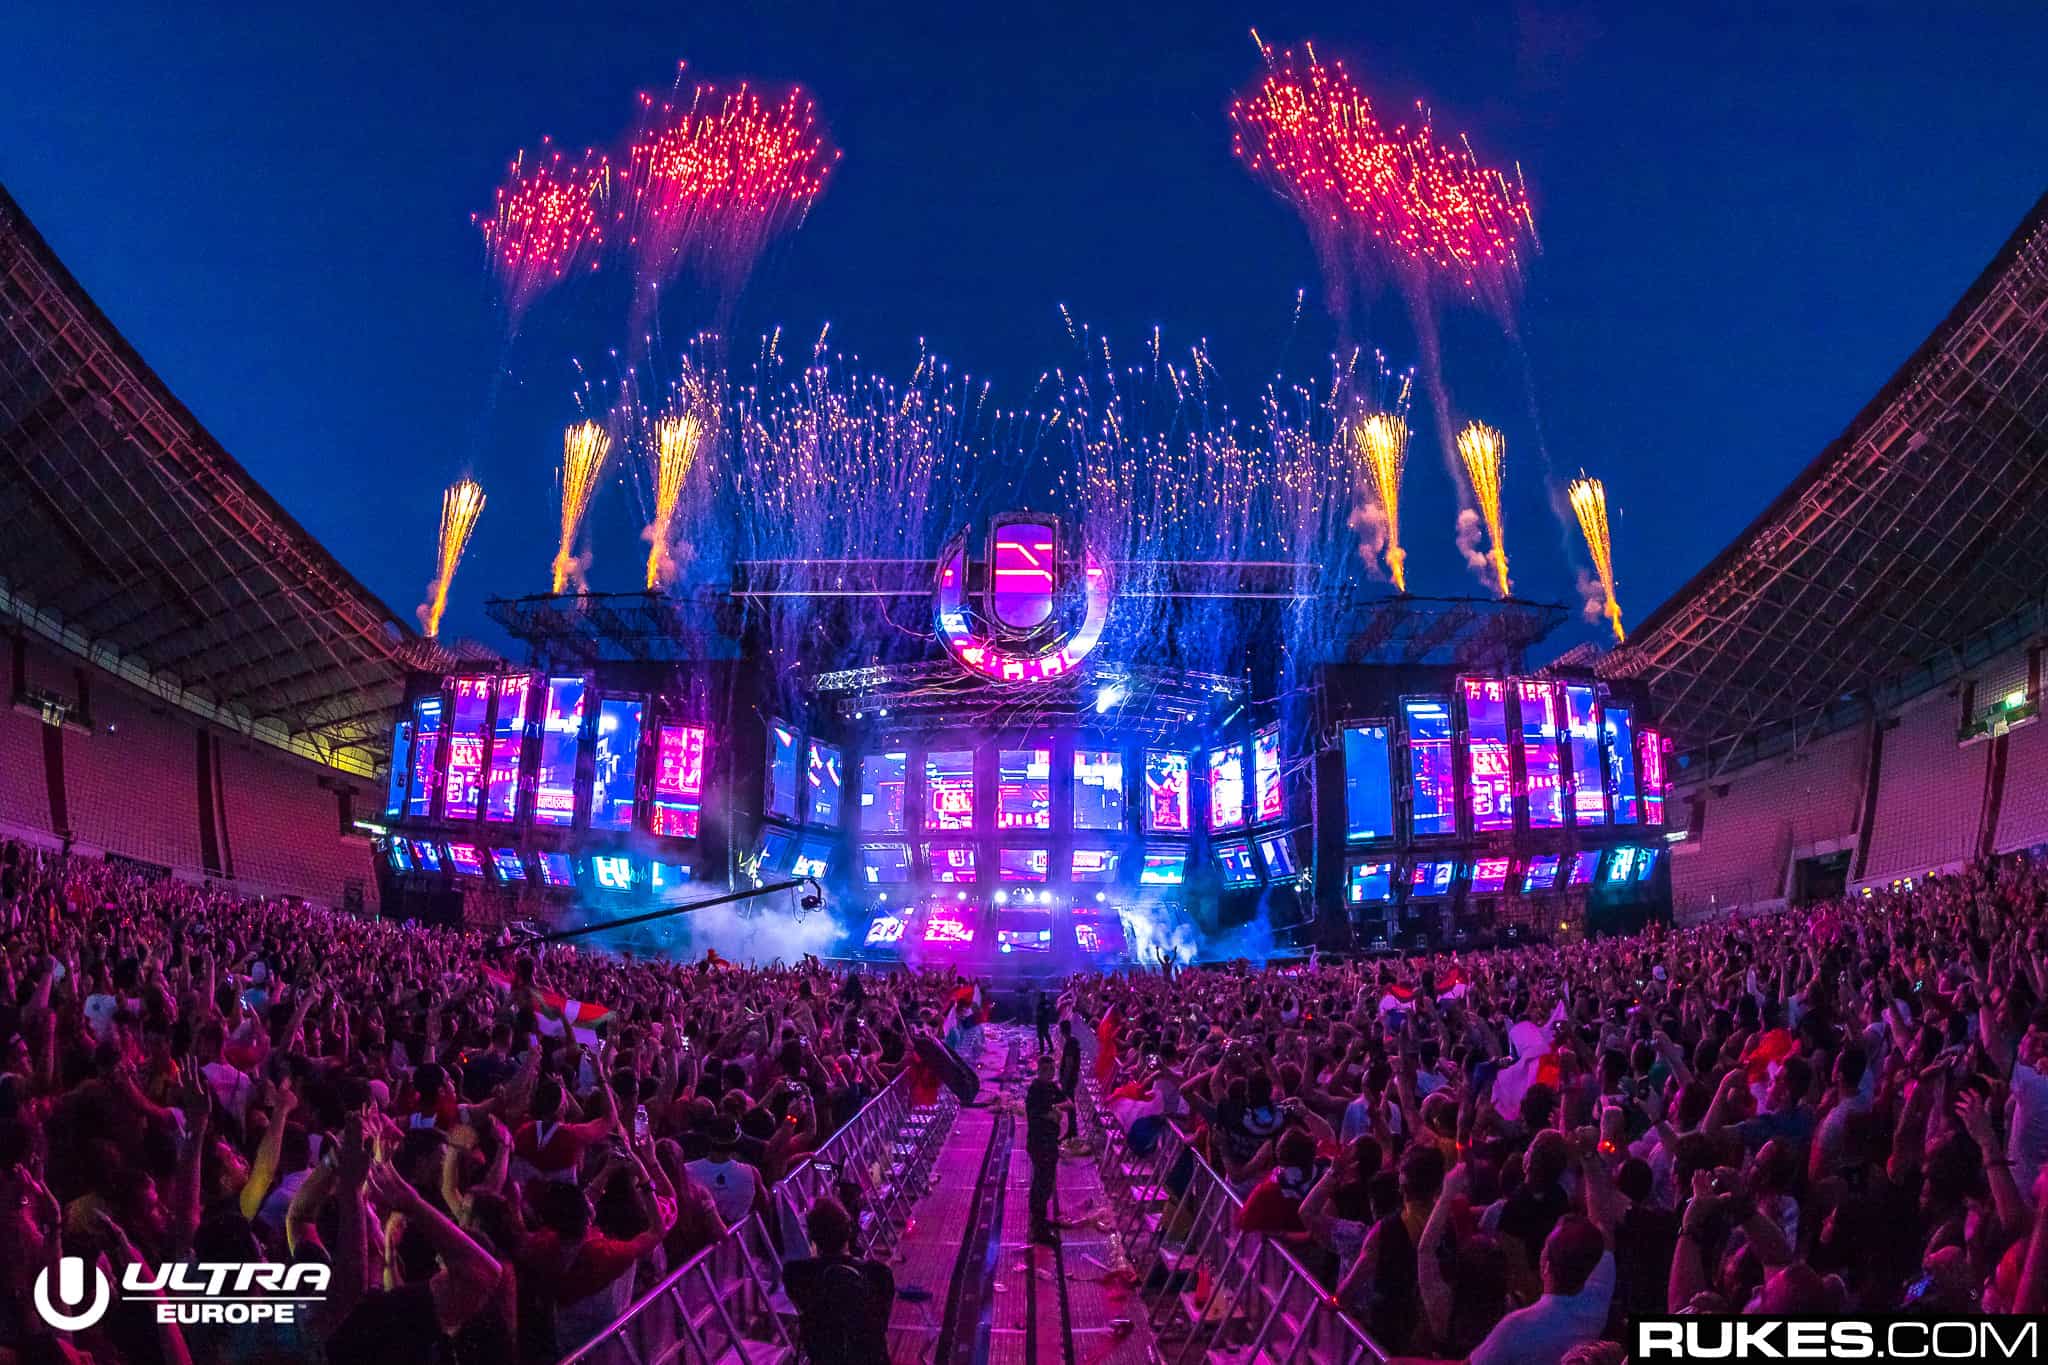 ULTRA Europe reveals phase 3 lineup featuring W&W, Nicole Moudaber and more